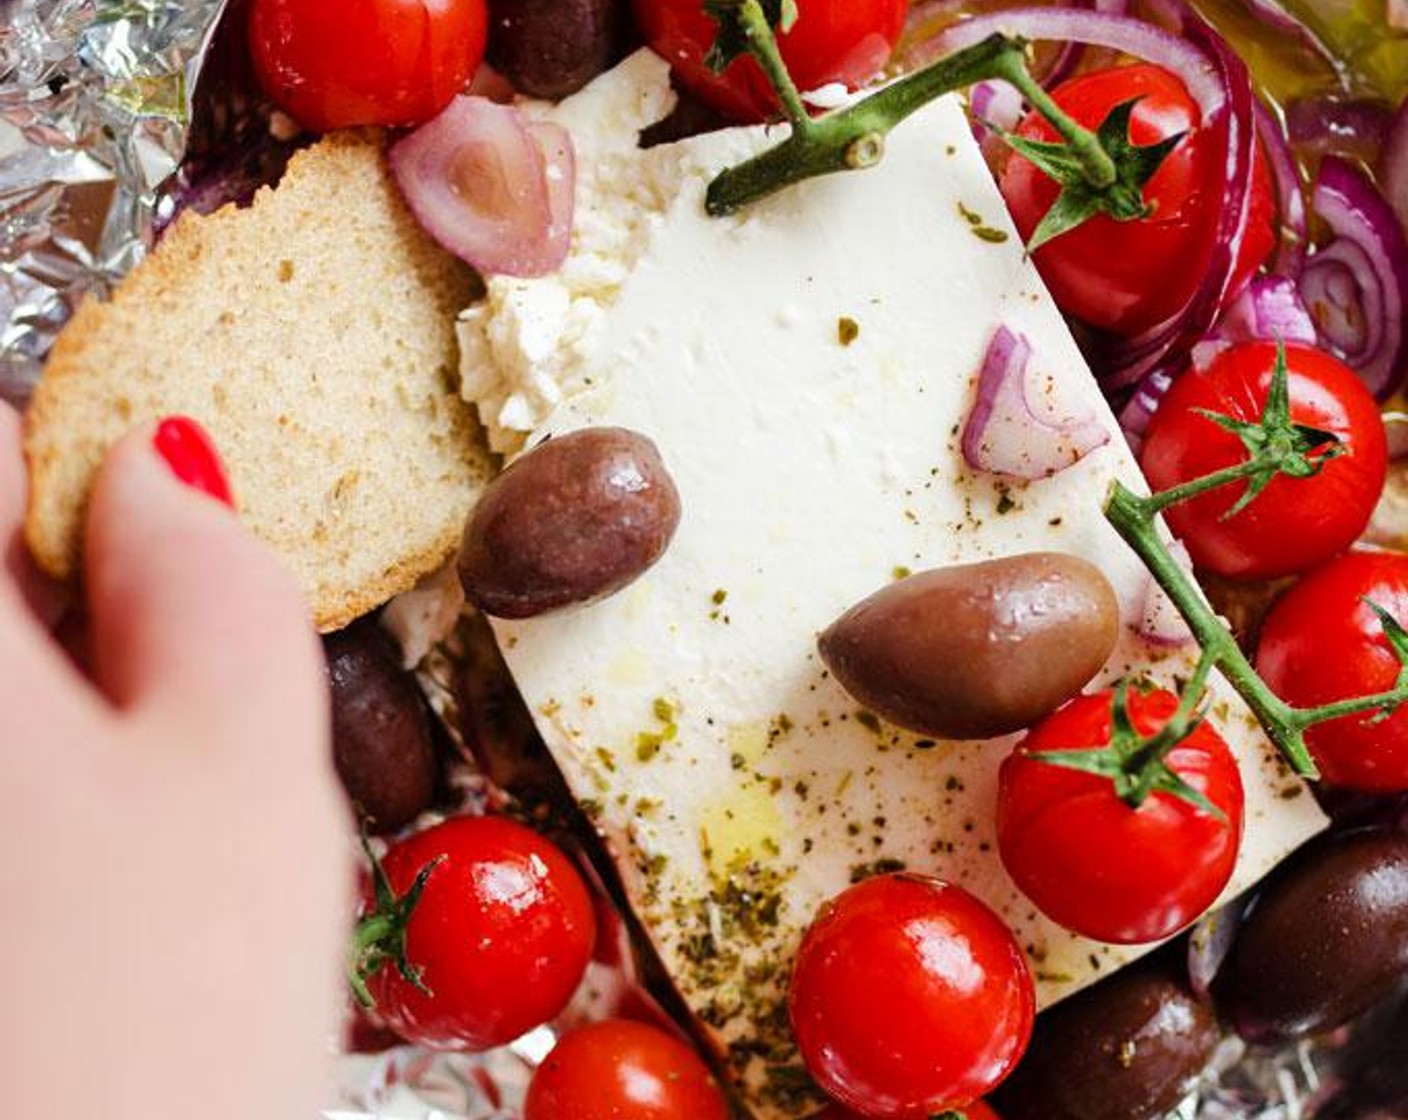 step 2 Set Feta Cheese (1 1/3 cups) in the center of a large sheet of aluminum foil. Drizzle with Olive Oil (2 Tbsp) and toss in the Olives (6), Cherry Tomatoes (10), Red Onion (1/4 cup), Ground Black Pepper (to taste) and Fresh Oregano (to taste).